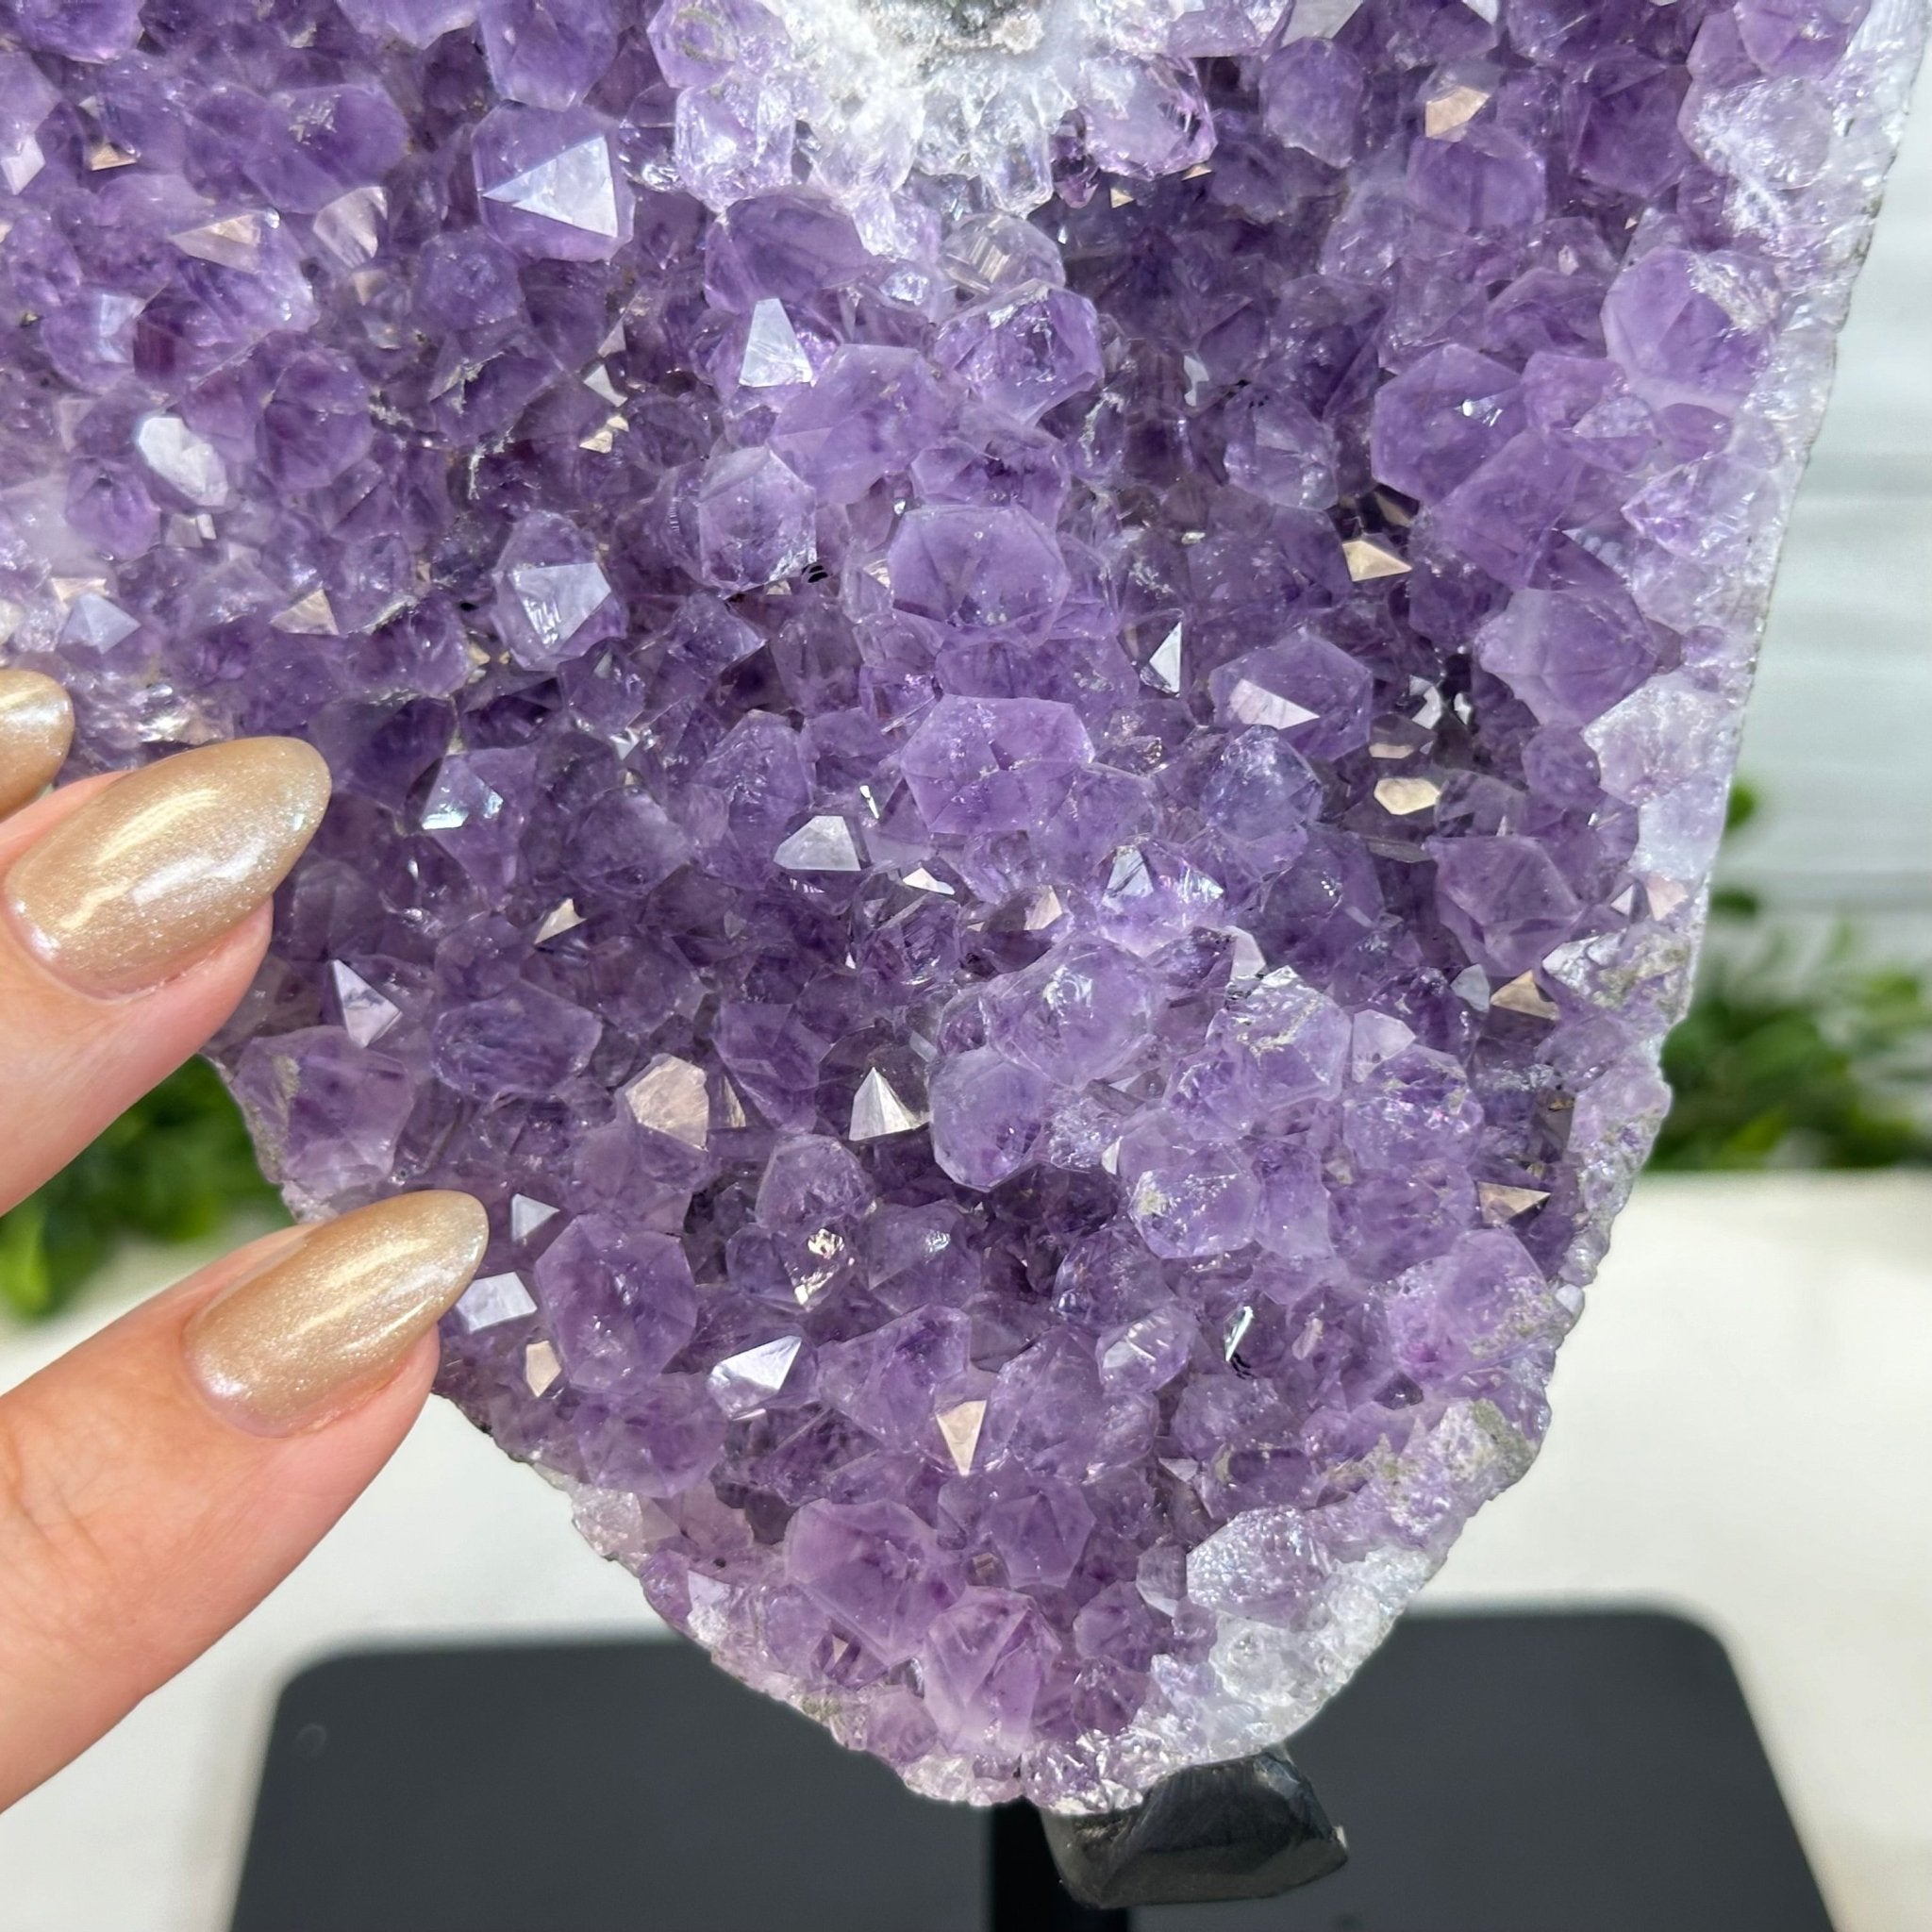 Quality Amethyst Cluster on a Metal Base, 13.9 lbs & 13.6" Tall #5491 - 0052 - Brazil GemsBrazil GemsQuality Amethyst Cluster on a Metal Base, 13.9 lbs & 13.6" Tall #5491 - 0052Clusters on Fixed Bases5491 - 0052